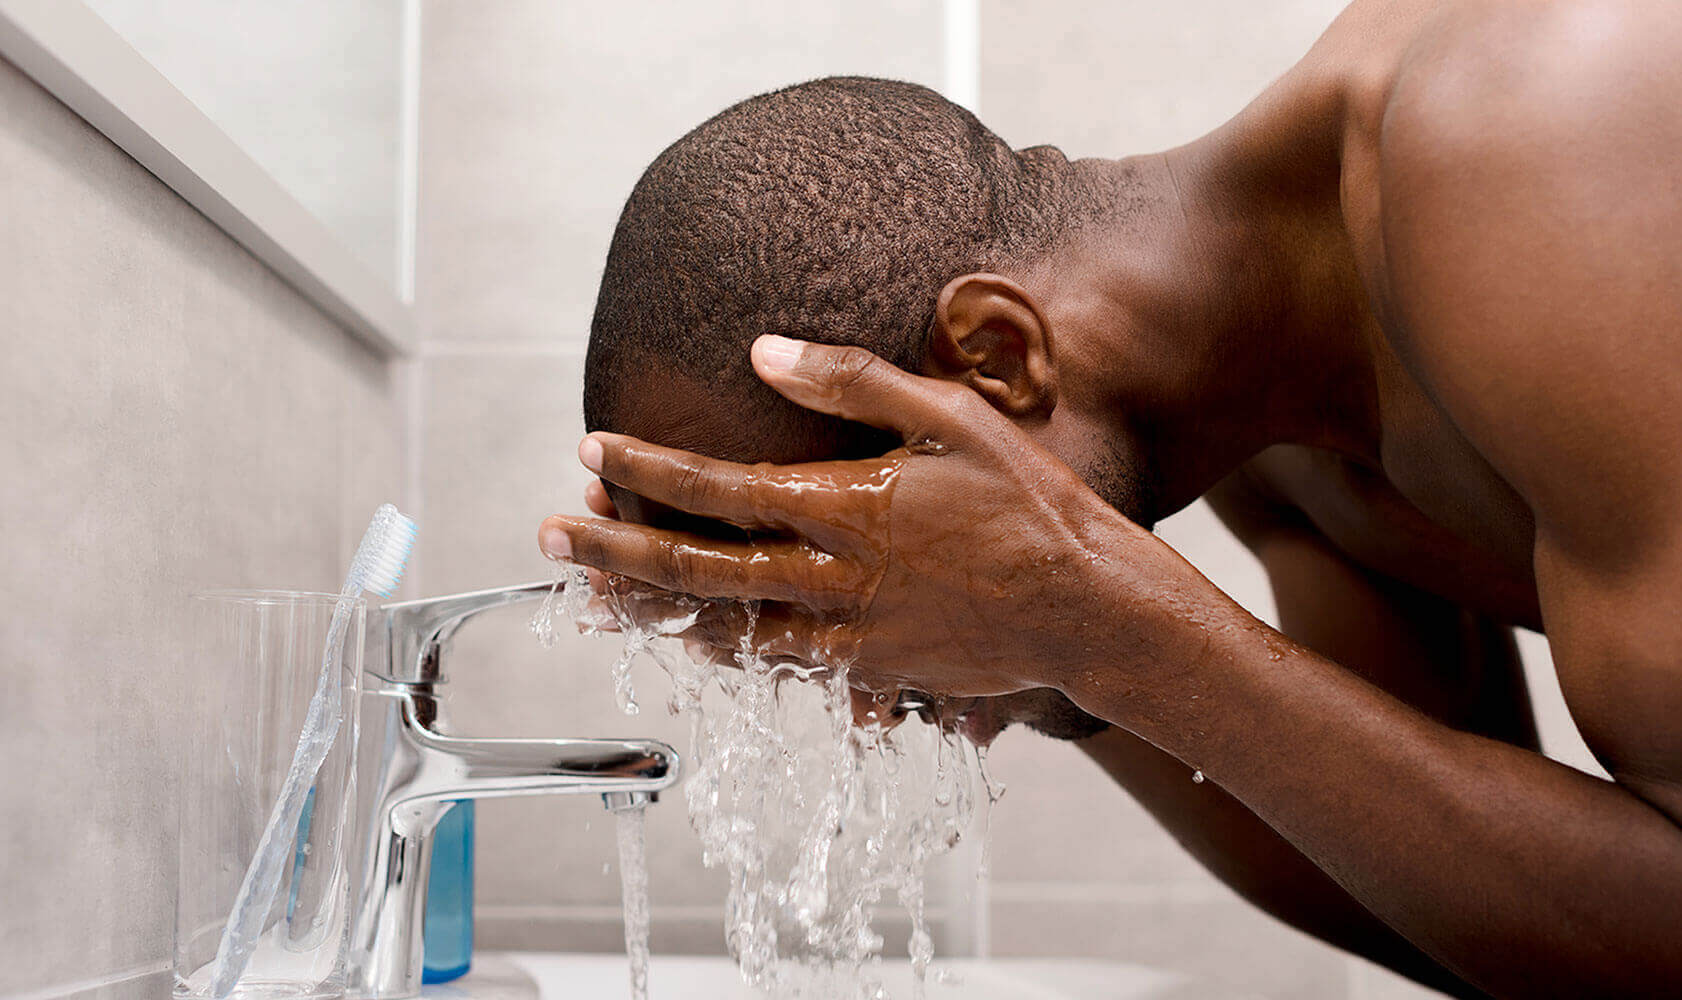 How many times a day should you wash your face?